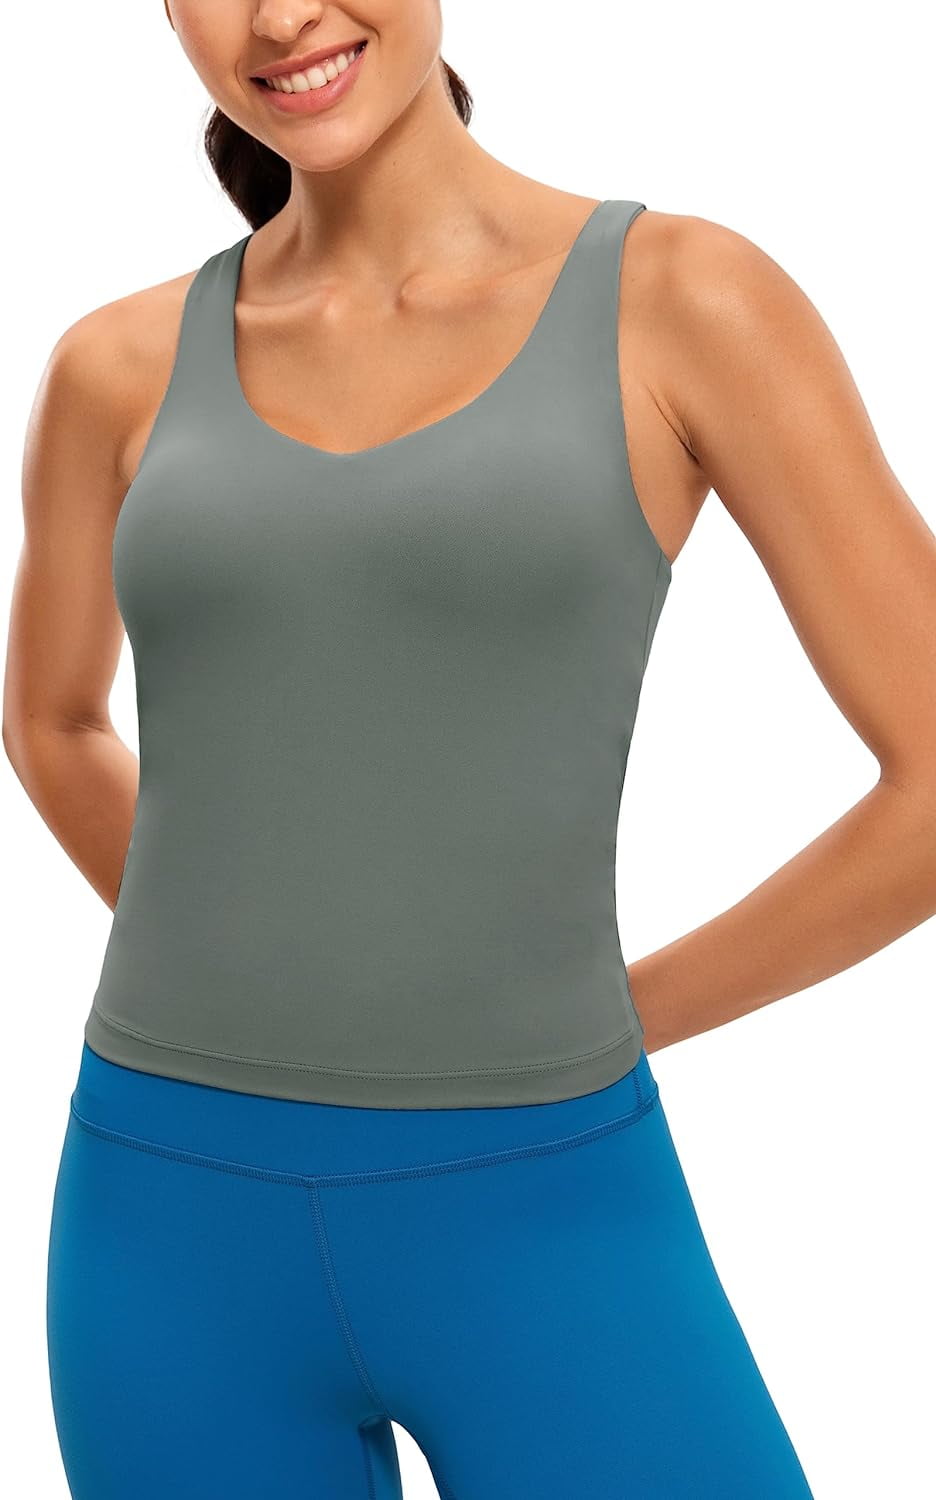 Butterluxe Womens V Neck Workout Tank Tops with Built in Bras - Sleeveless  Padded Racerback Yoga Athletic Camisole